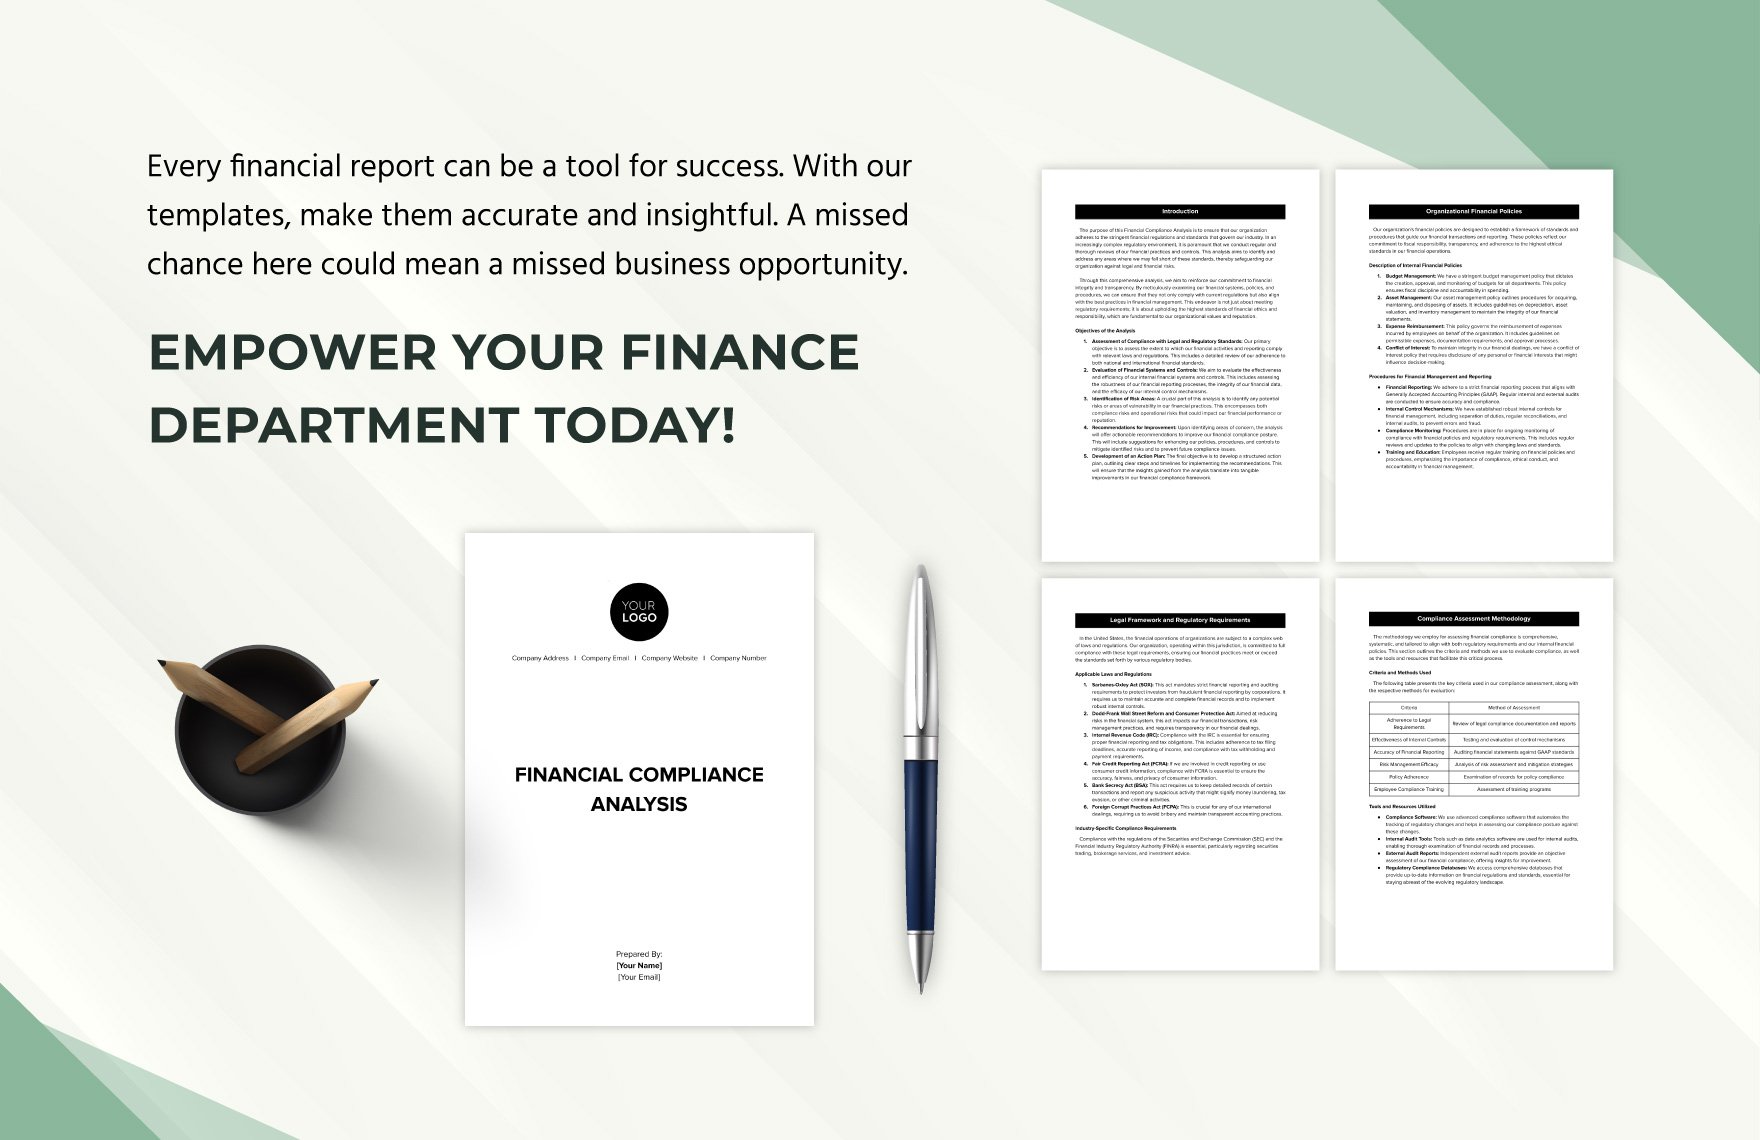 Financial Compliance Analysis Template